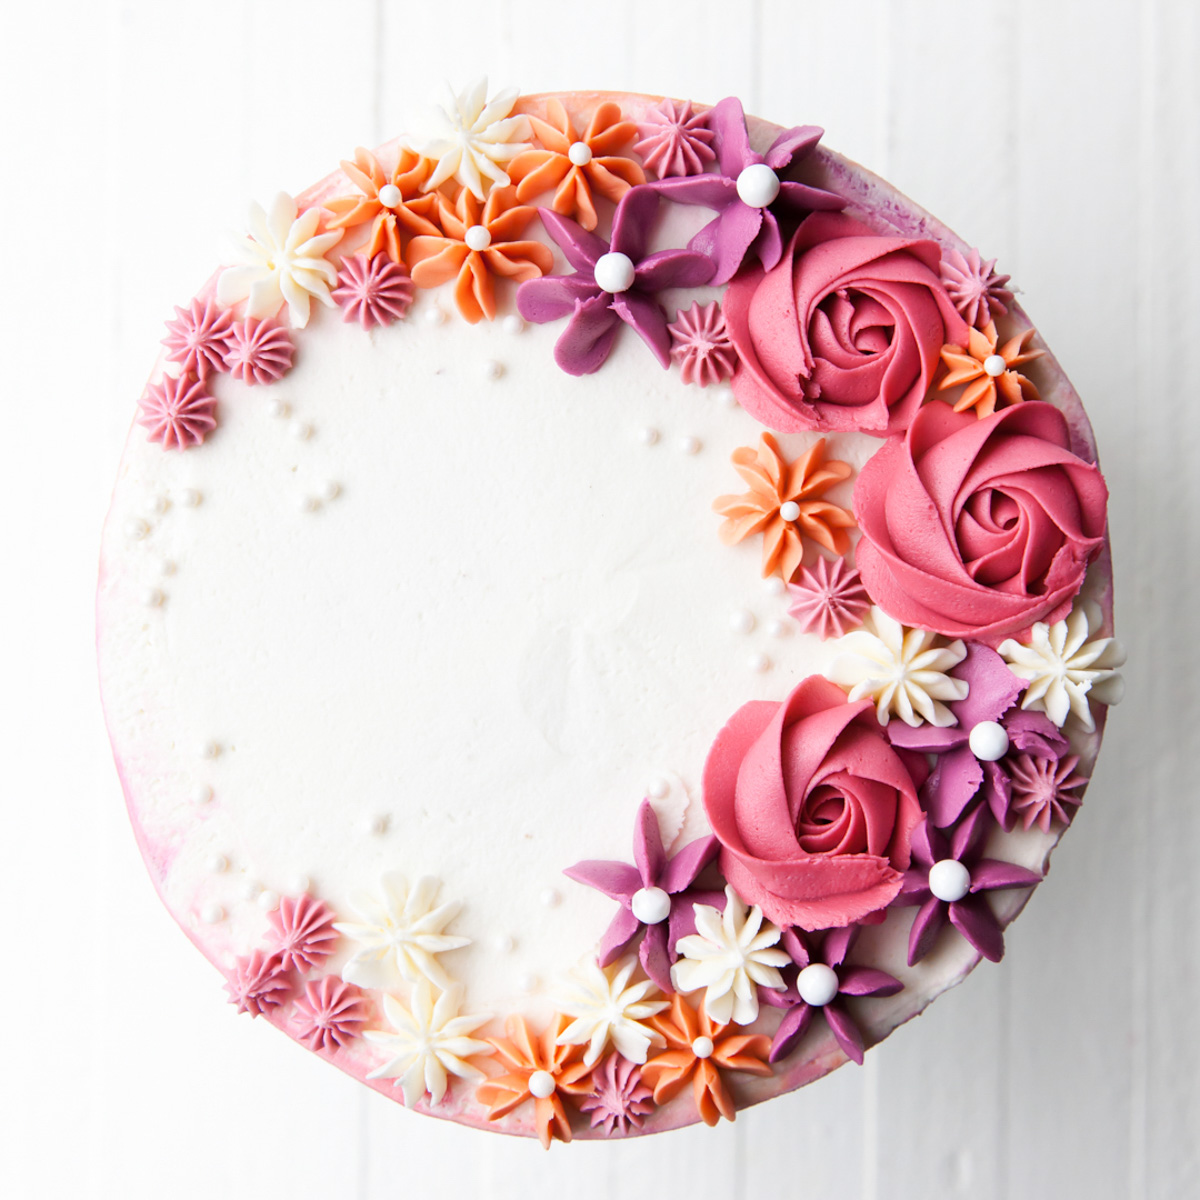 How to Decorate a Buttercream Rose Cake | Suzanne Groenewald | Skillshare